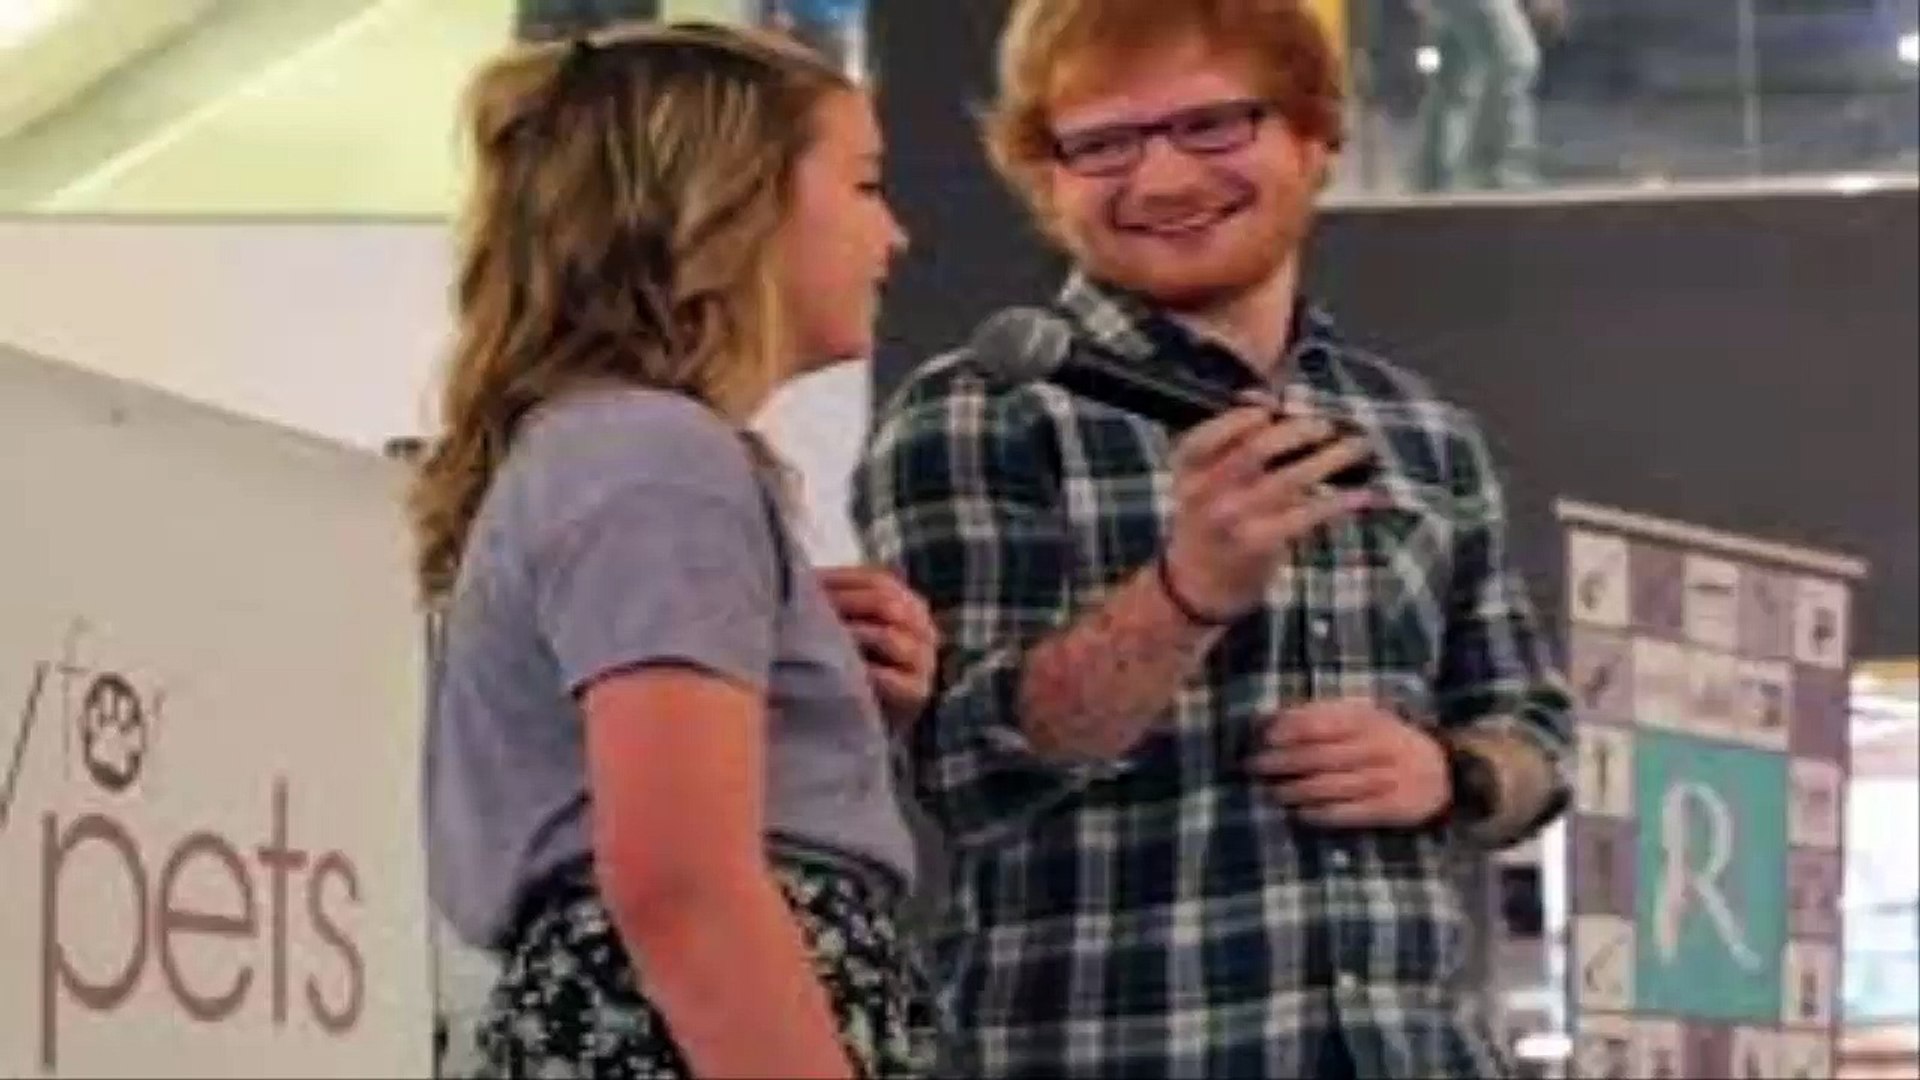 Ed Sheeran Surprises Fan Singing His Song At A Mall In Canada.